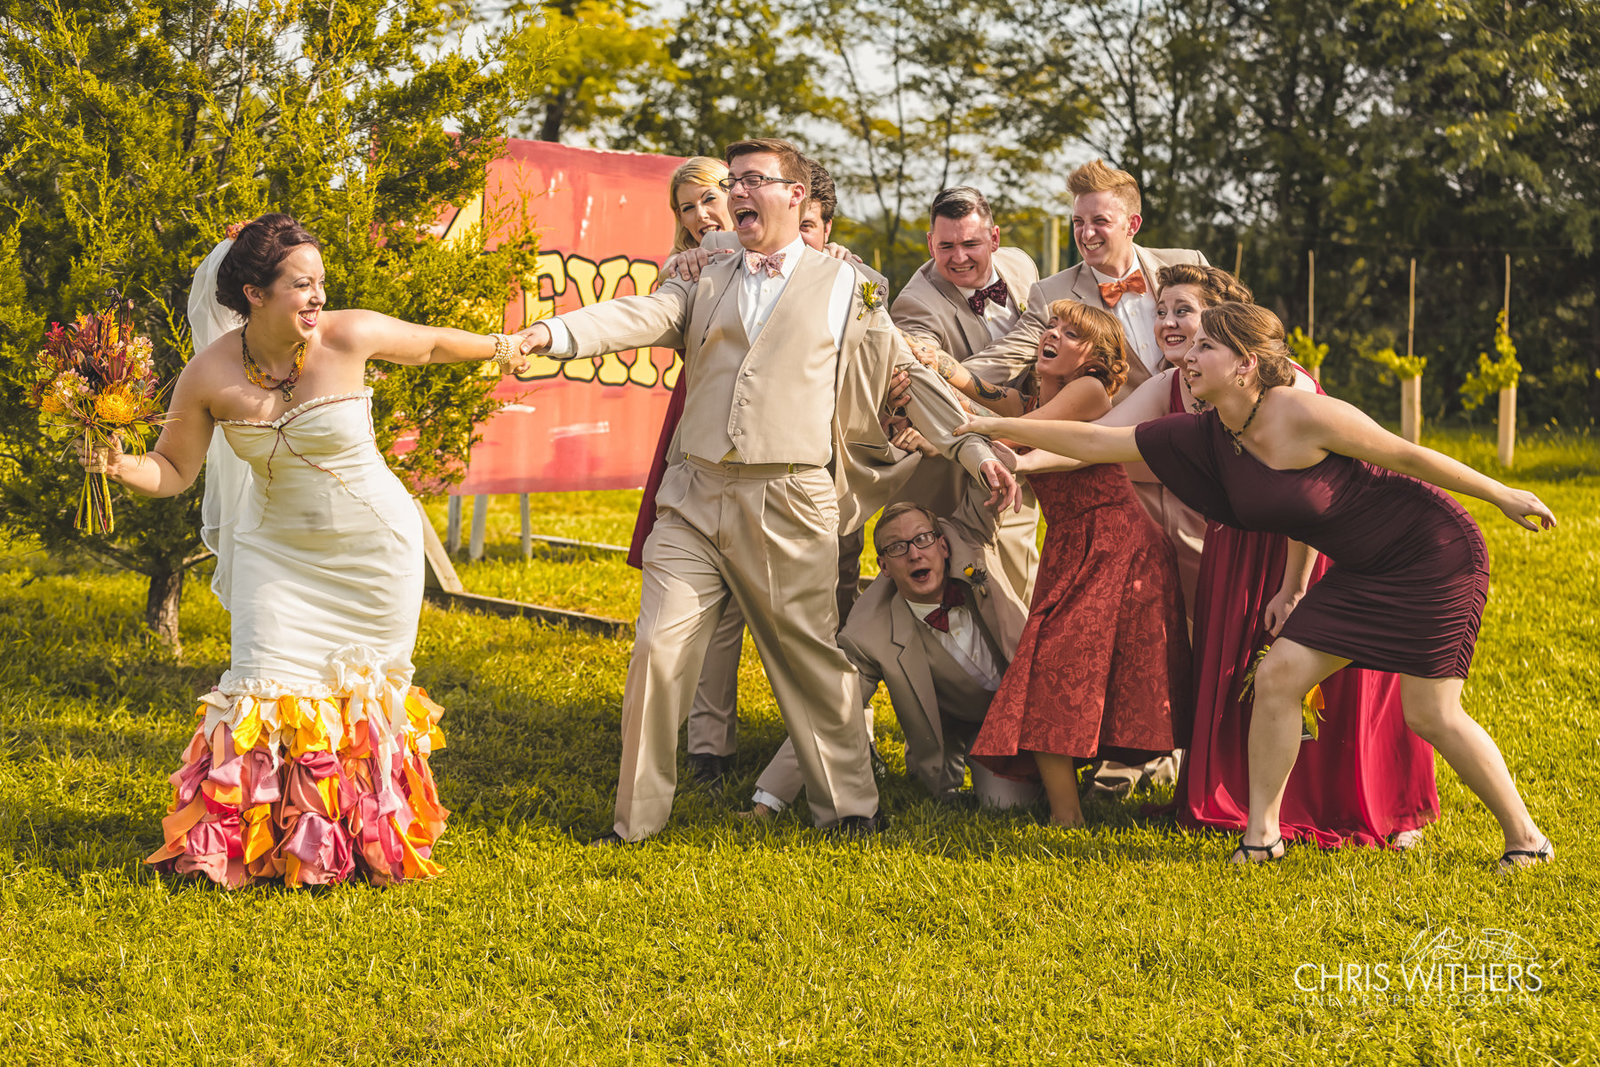 Springfield Illinois Wedding Photographer - Chris Withers Photography (39 of 159)